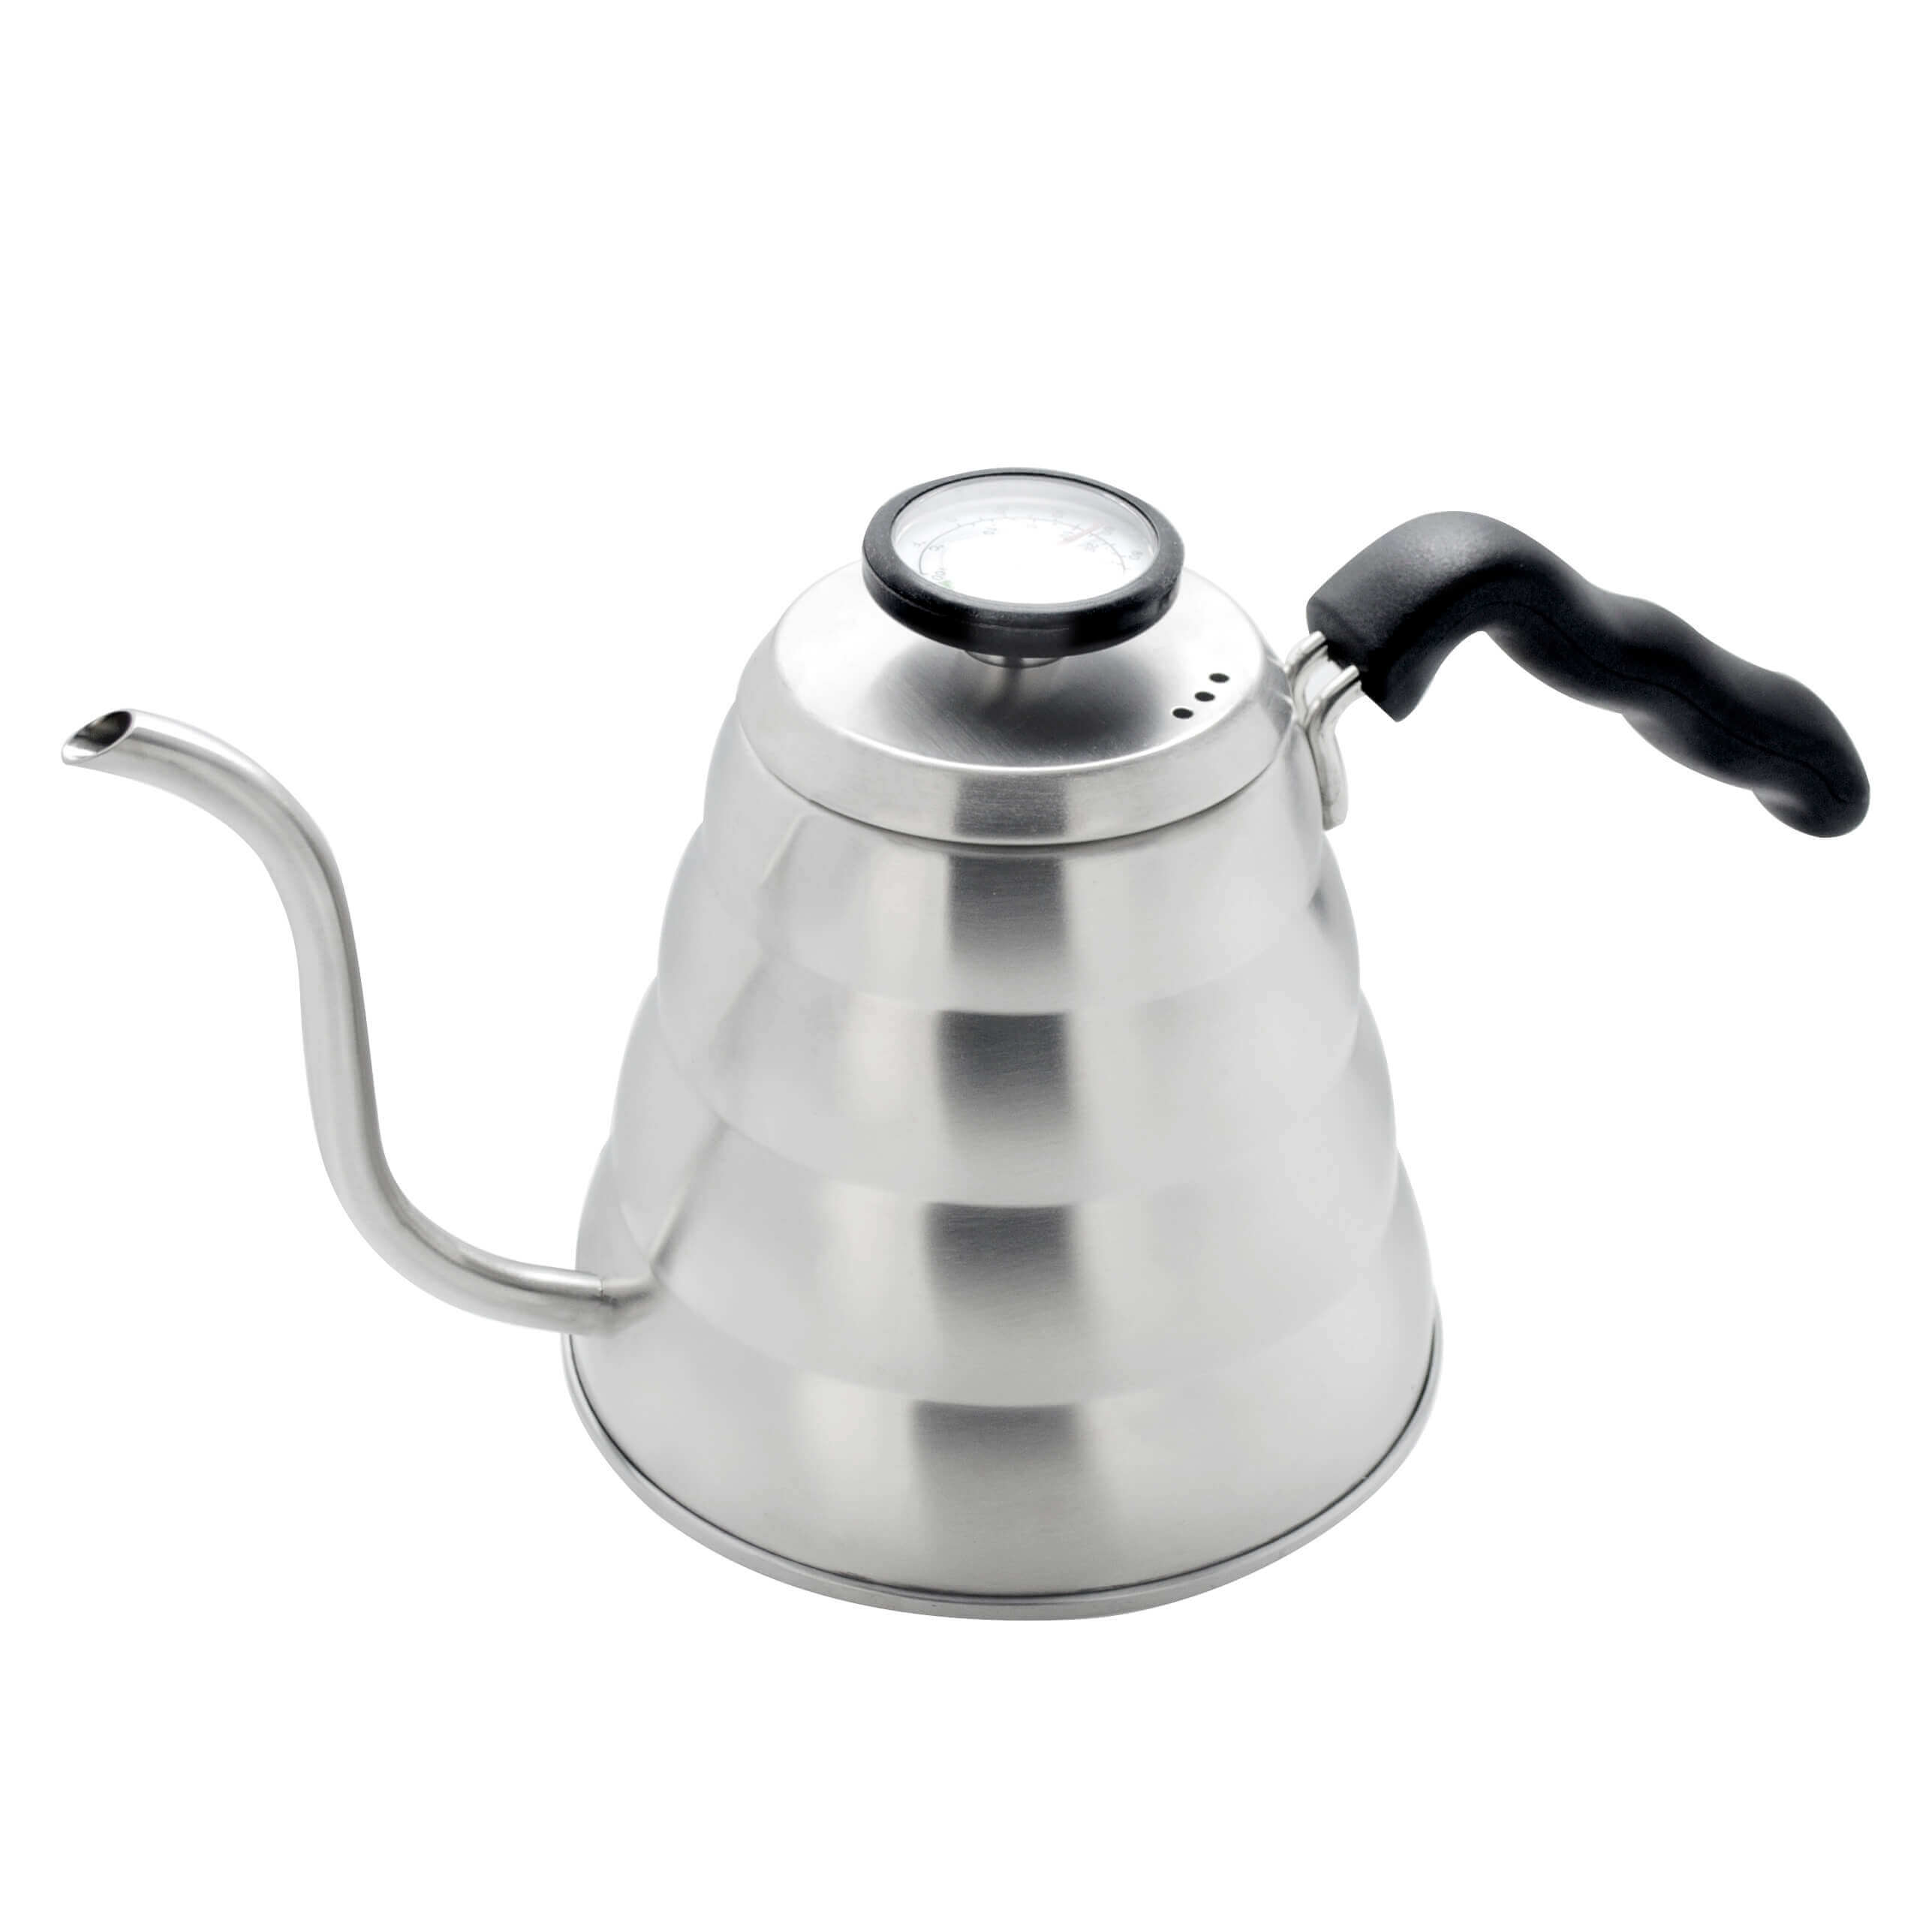 Kitchables Coffee Kettle 1.2L